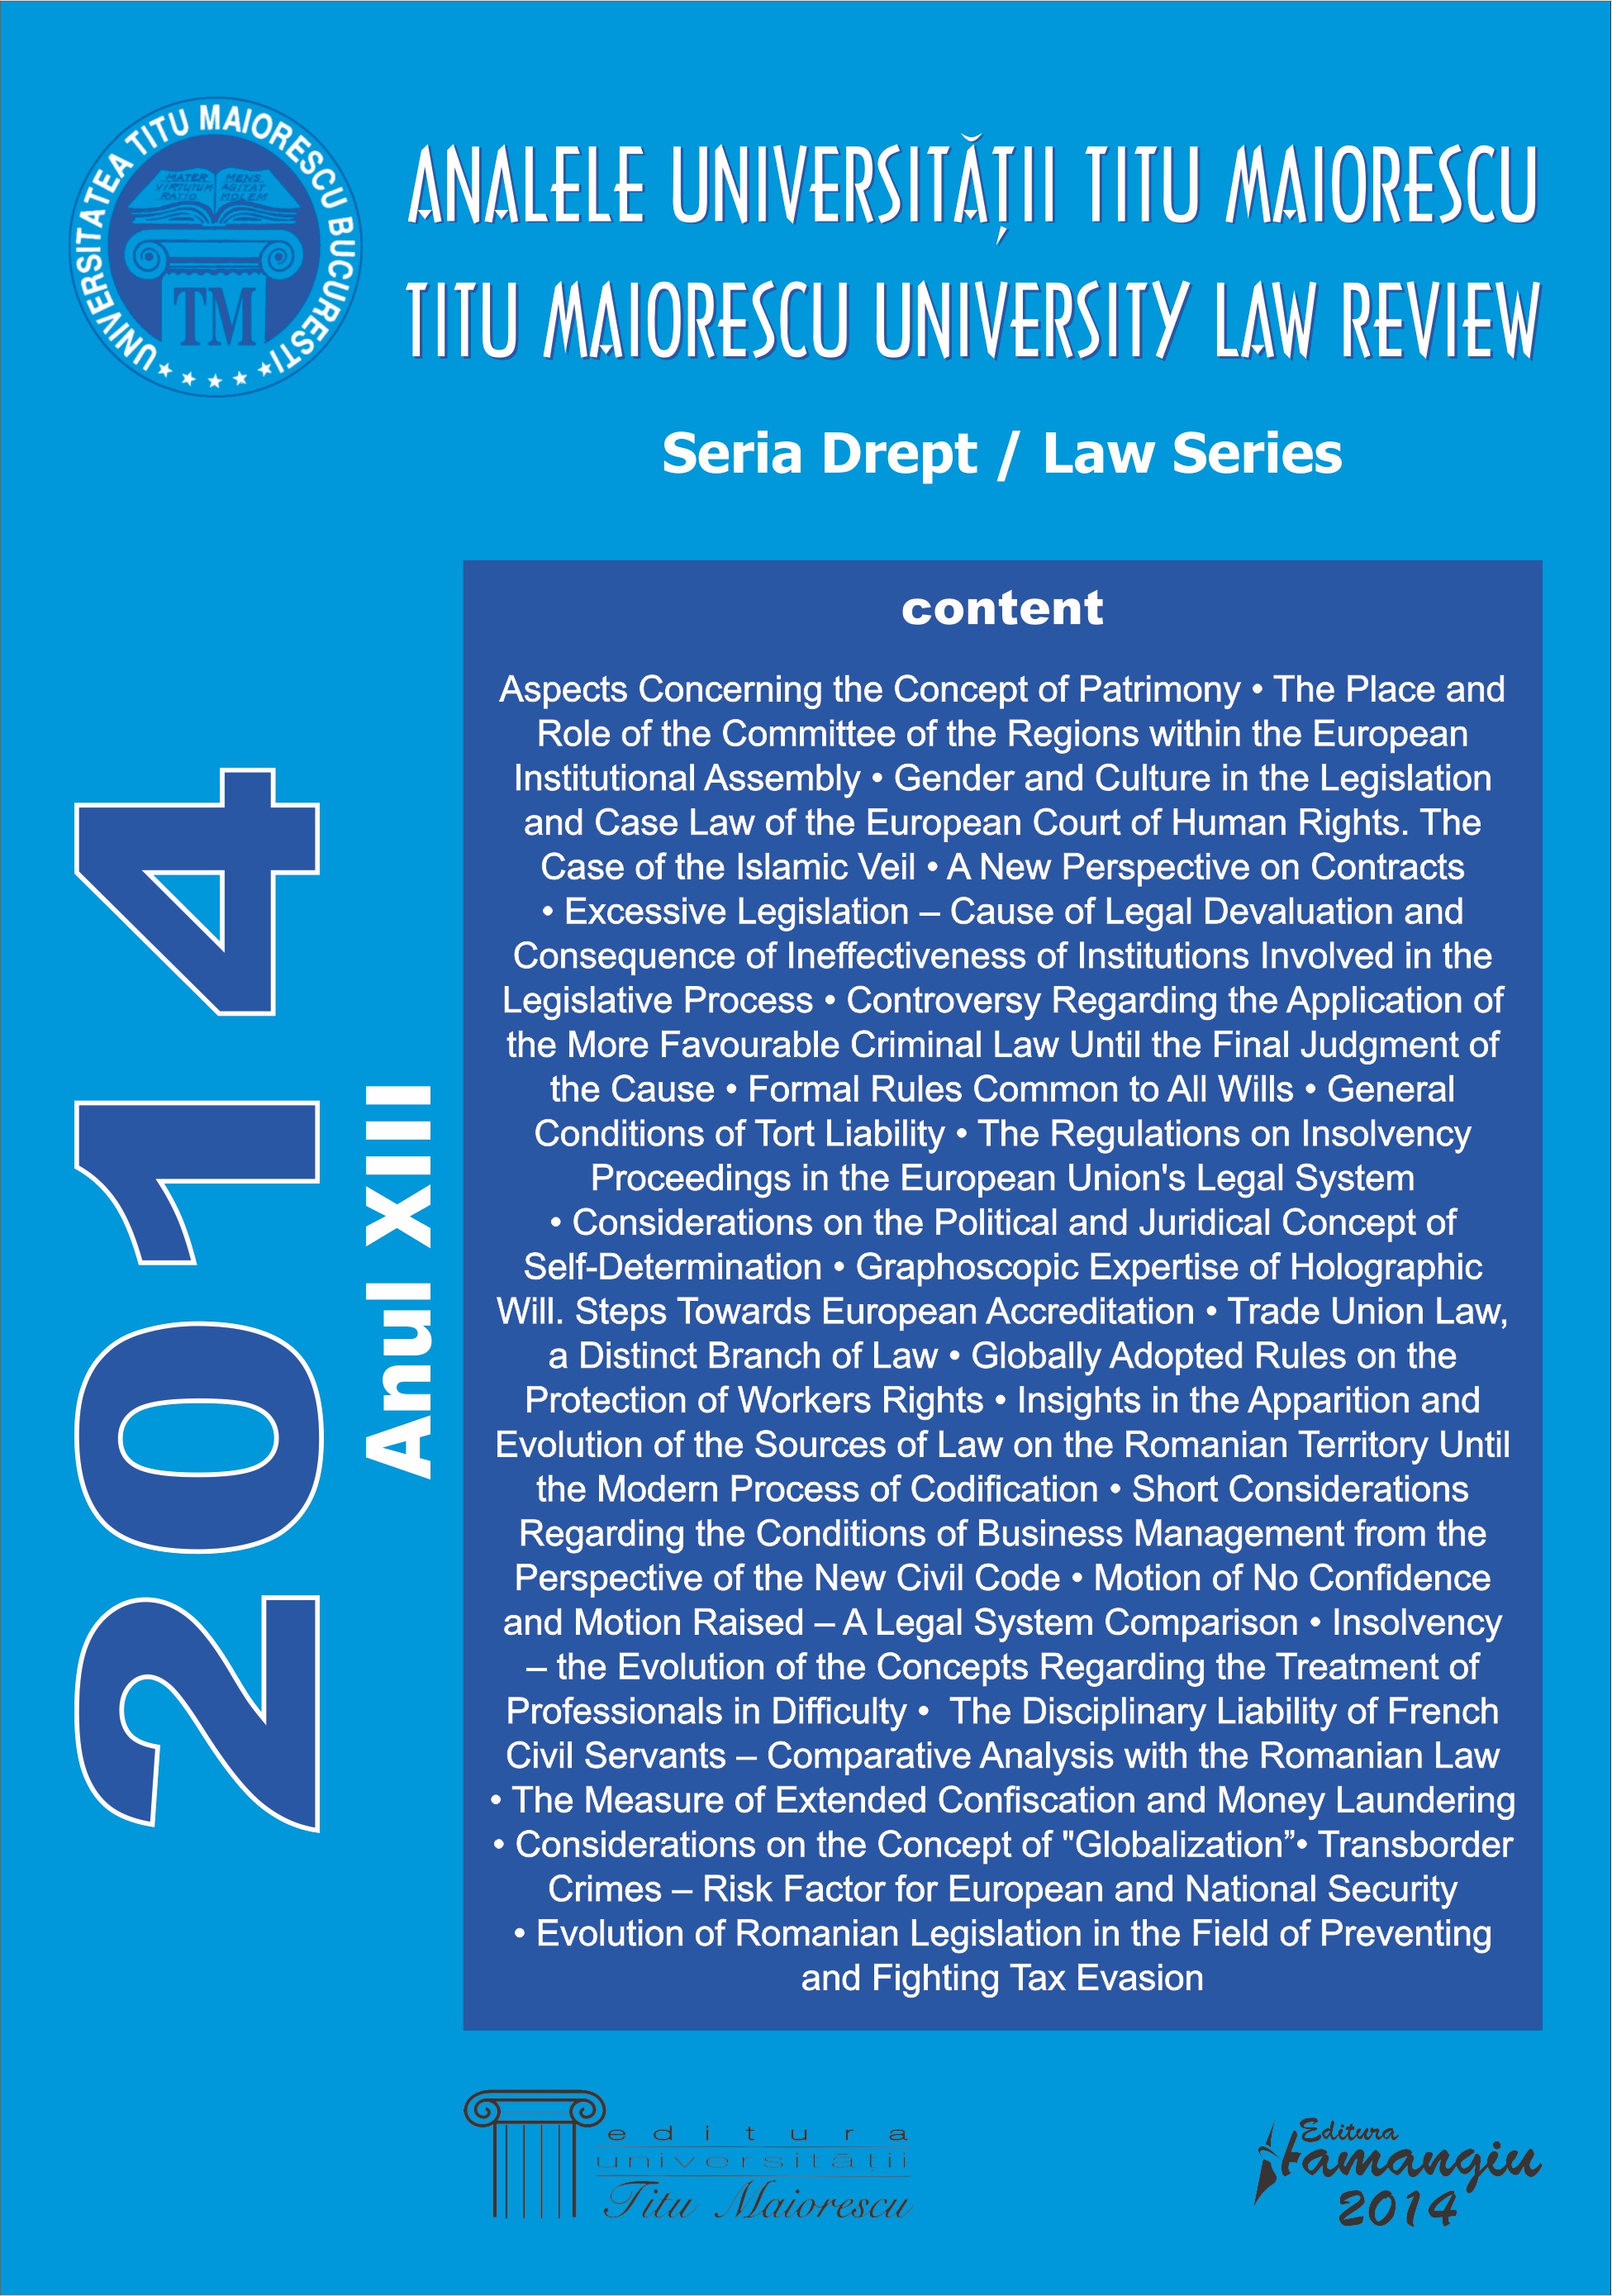 INSIGHTS IN THE APPARITION AND EVOLUTION OF THE SOURCES OF LAW ON THE ROMANIAN TERRITORY UNTIL THE MODERN PROCESS OF CODIFICATION Cover Image